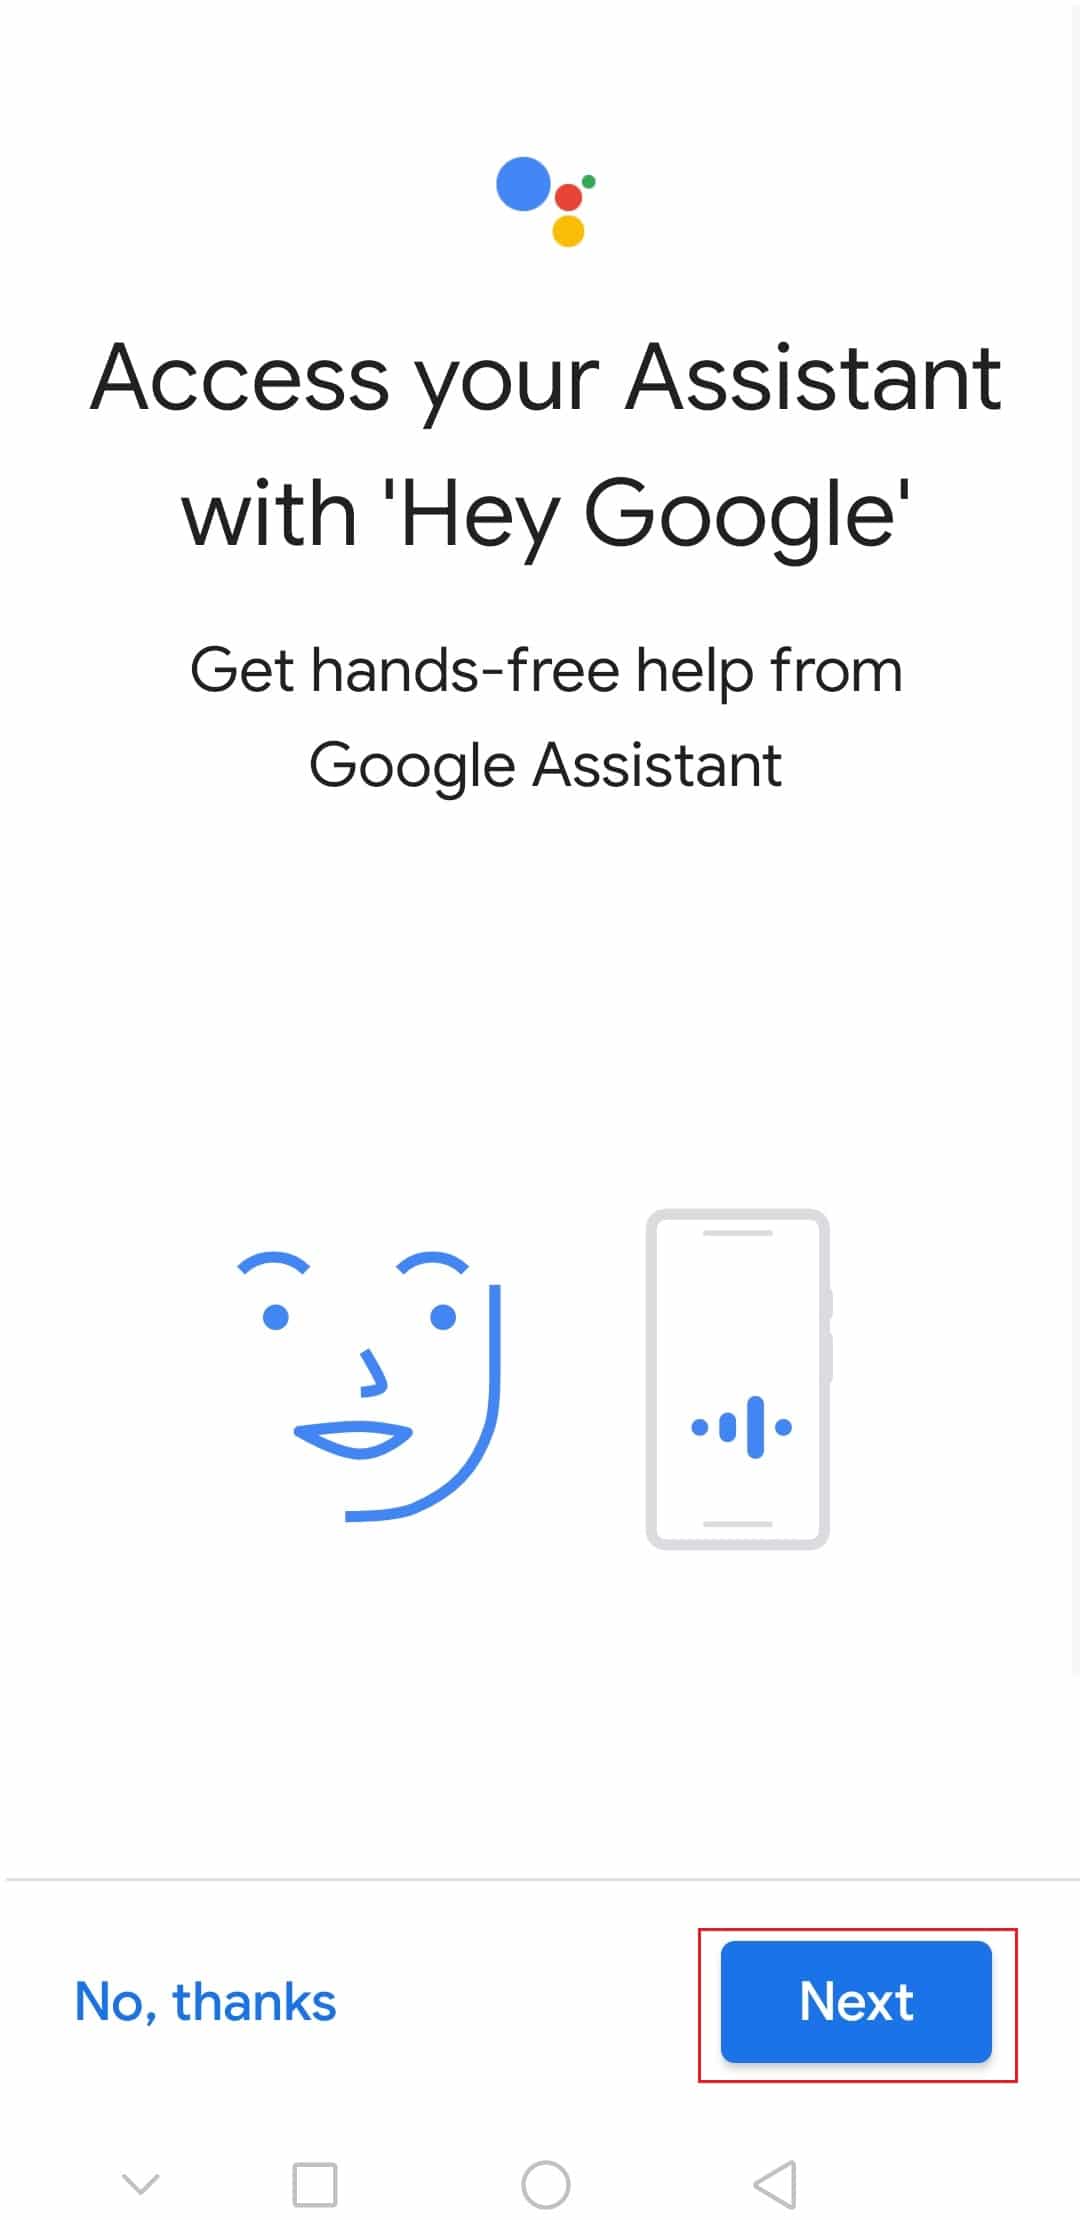 tap on Next to access your Assistant